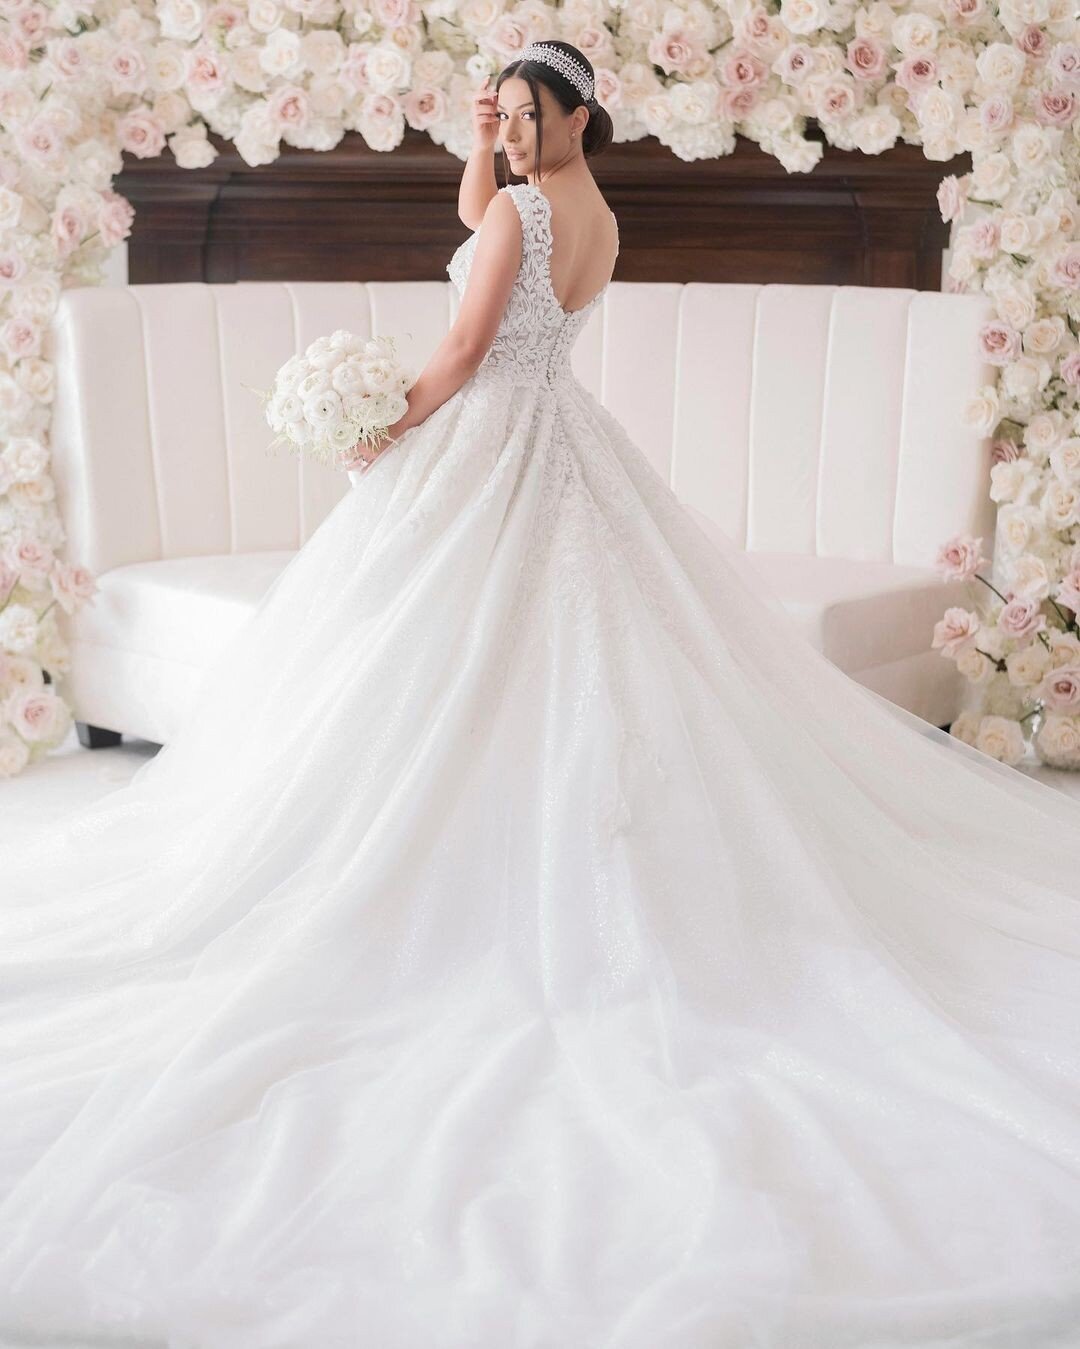 Get ready to say &quot;I do&quot; to the dress of your dreams! The bride looked stunning in her one-of-a-kind dress on her big day!✨ Find &ldquo;The One&quot; at MayanaBridals.com

Captured by: @renezadoriphotography

Appointments: MayanaBridals.com/